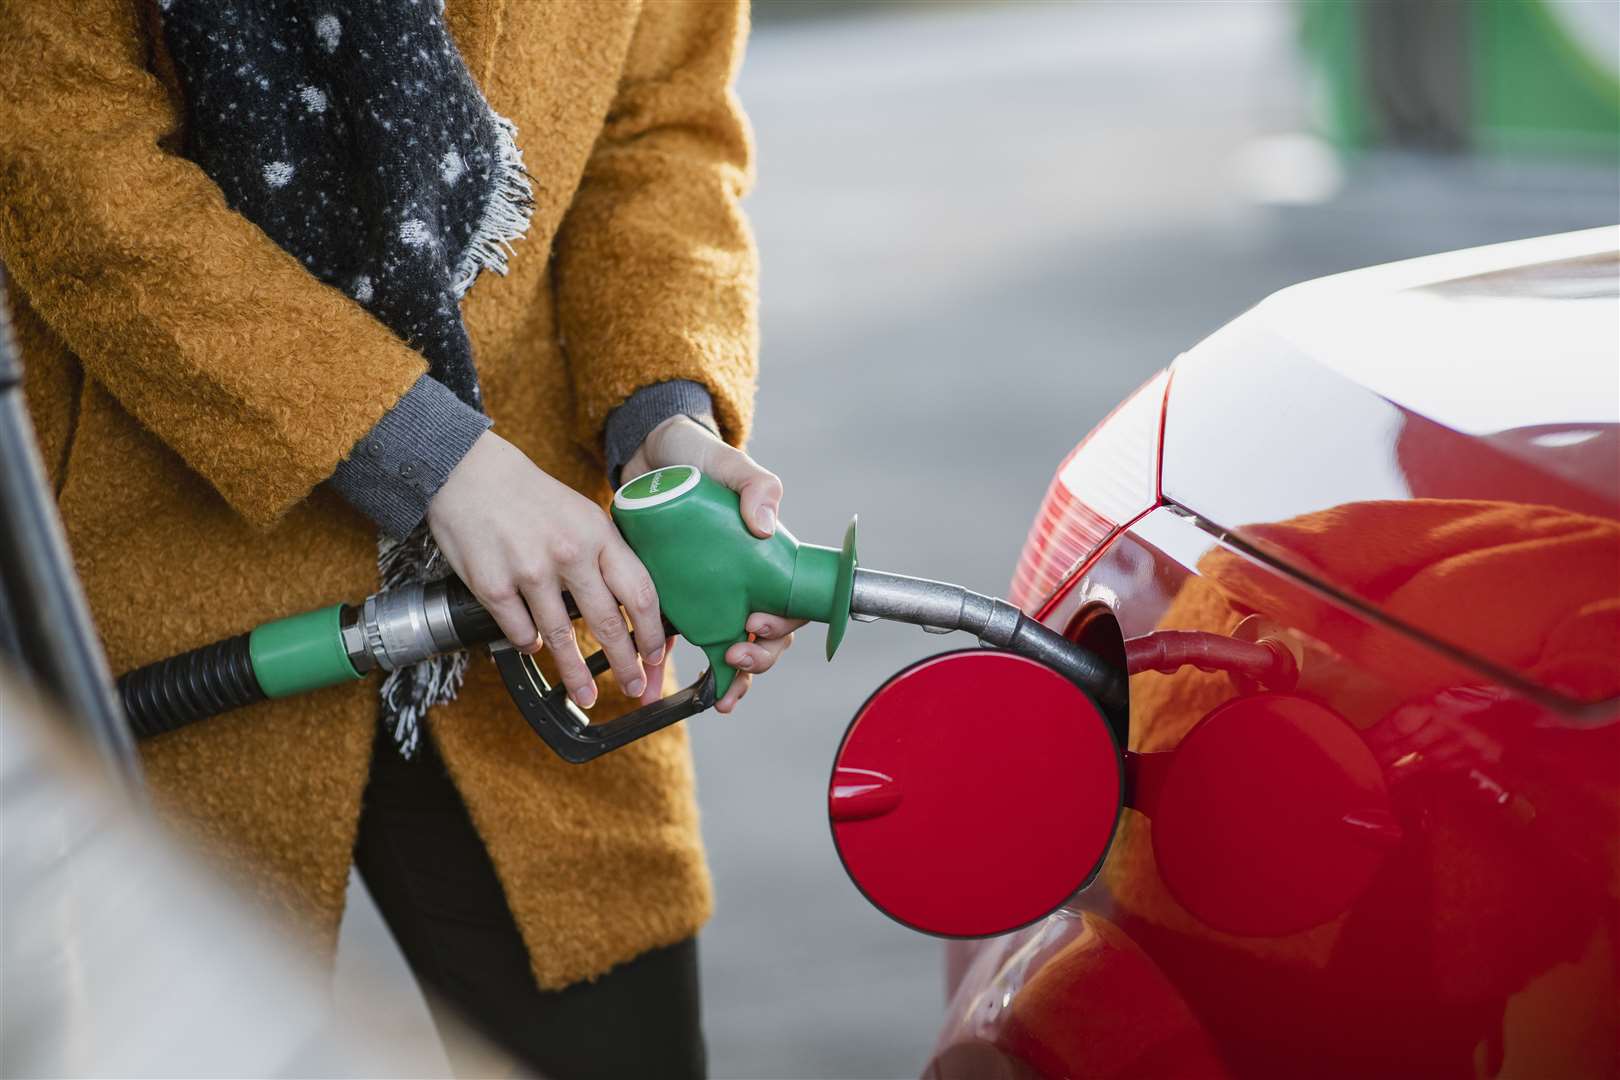 There was no announcement on whether the government intends to keep the five pence cut in fuel duty